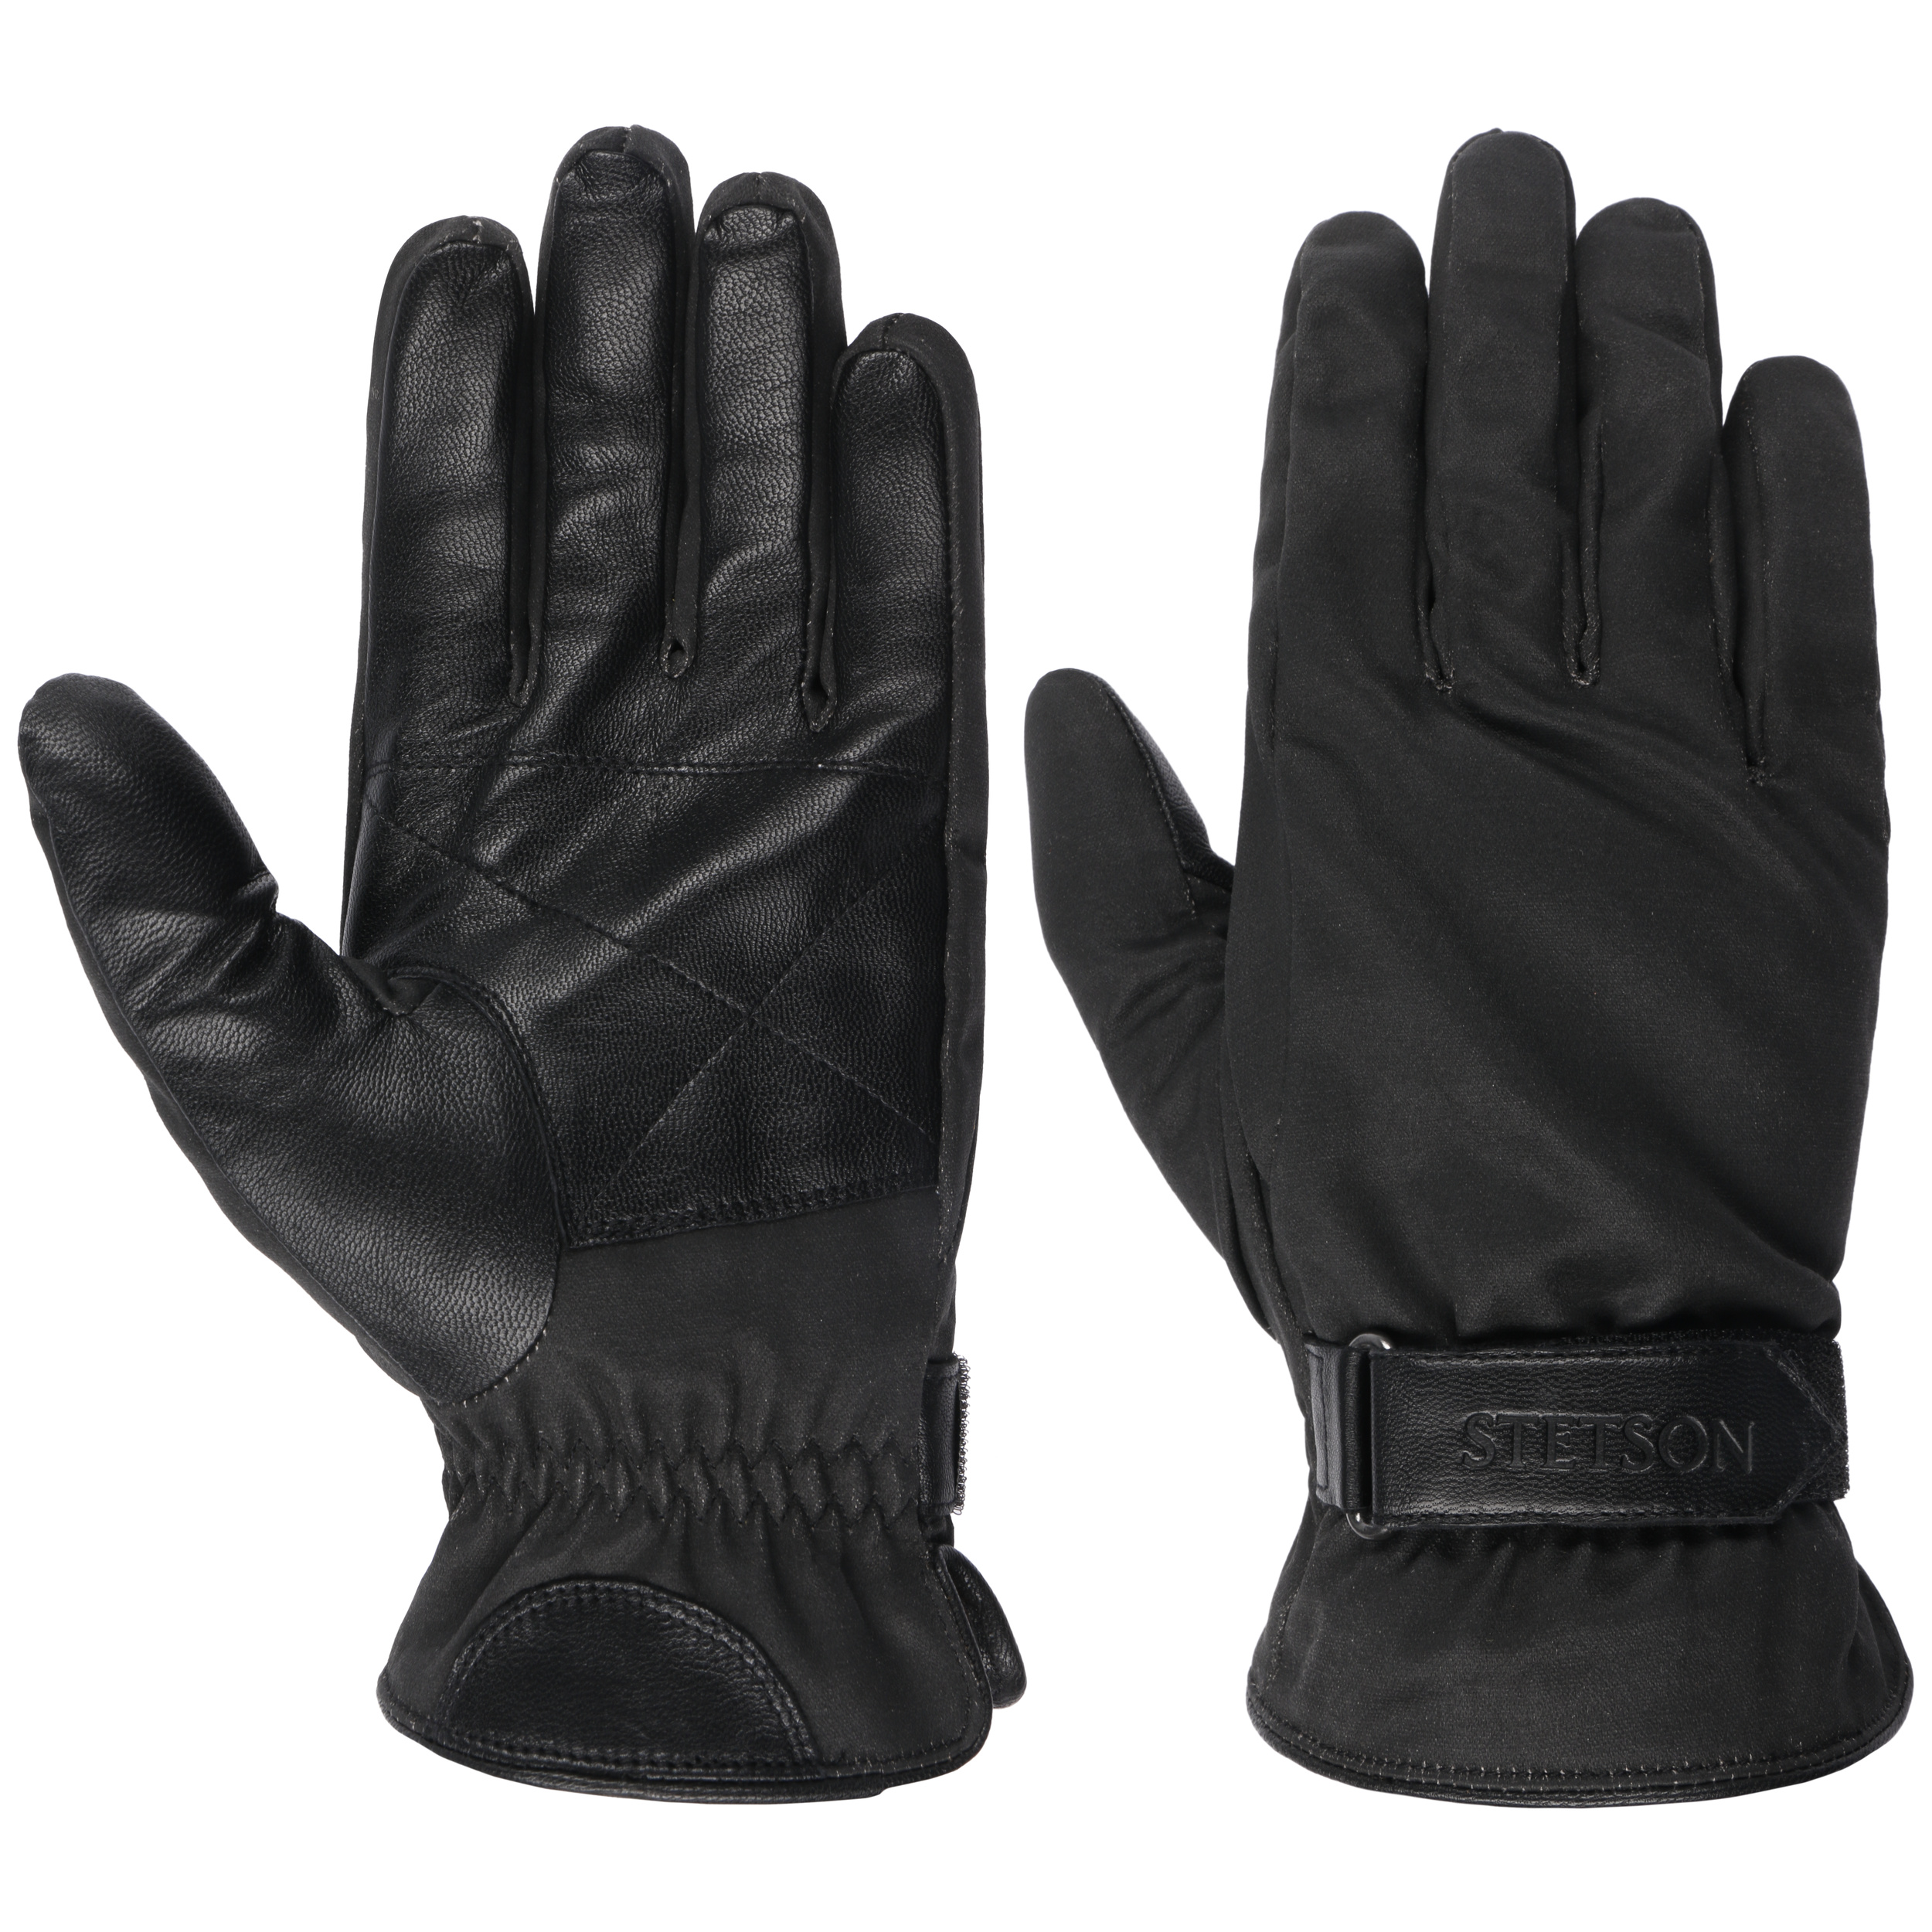 Twotone Goat Nappa Leather Gloves By Stetson 8900